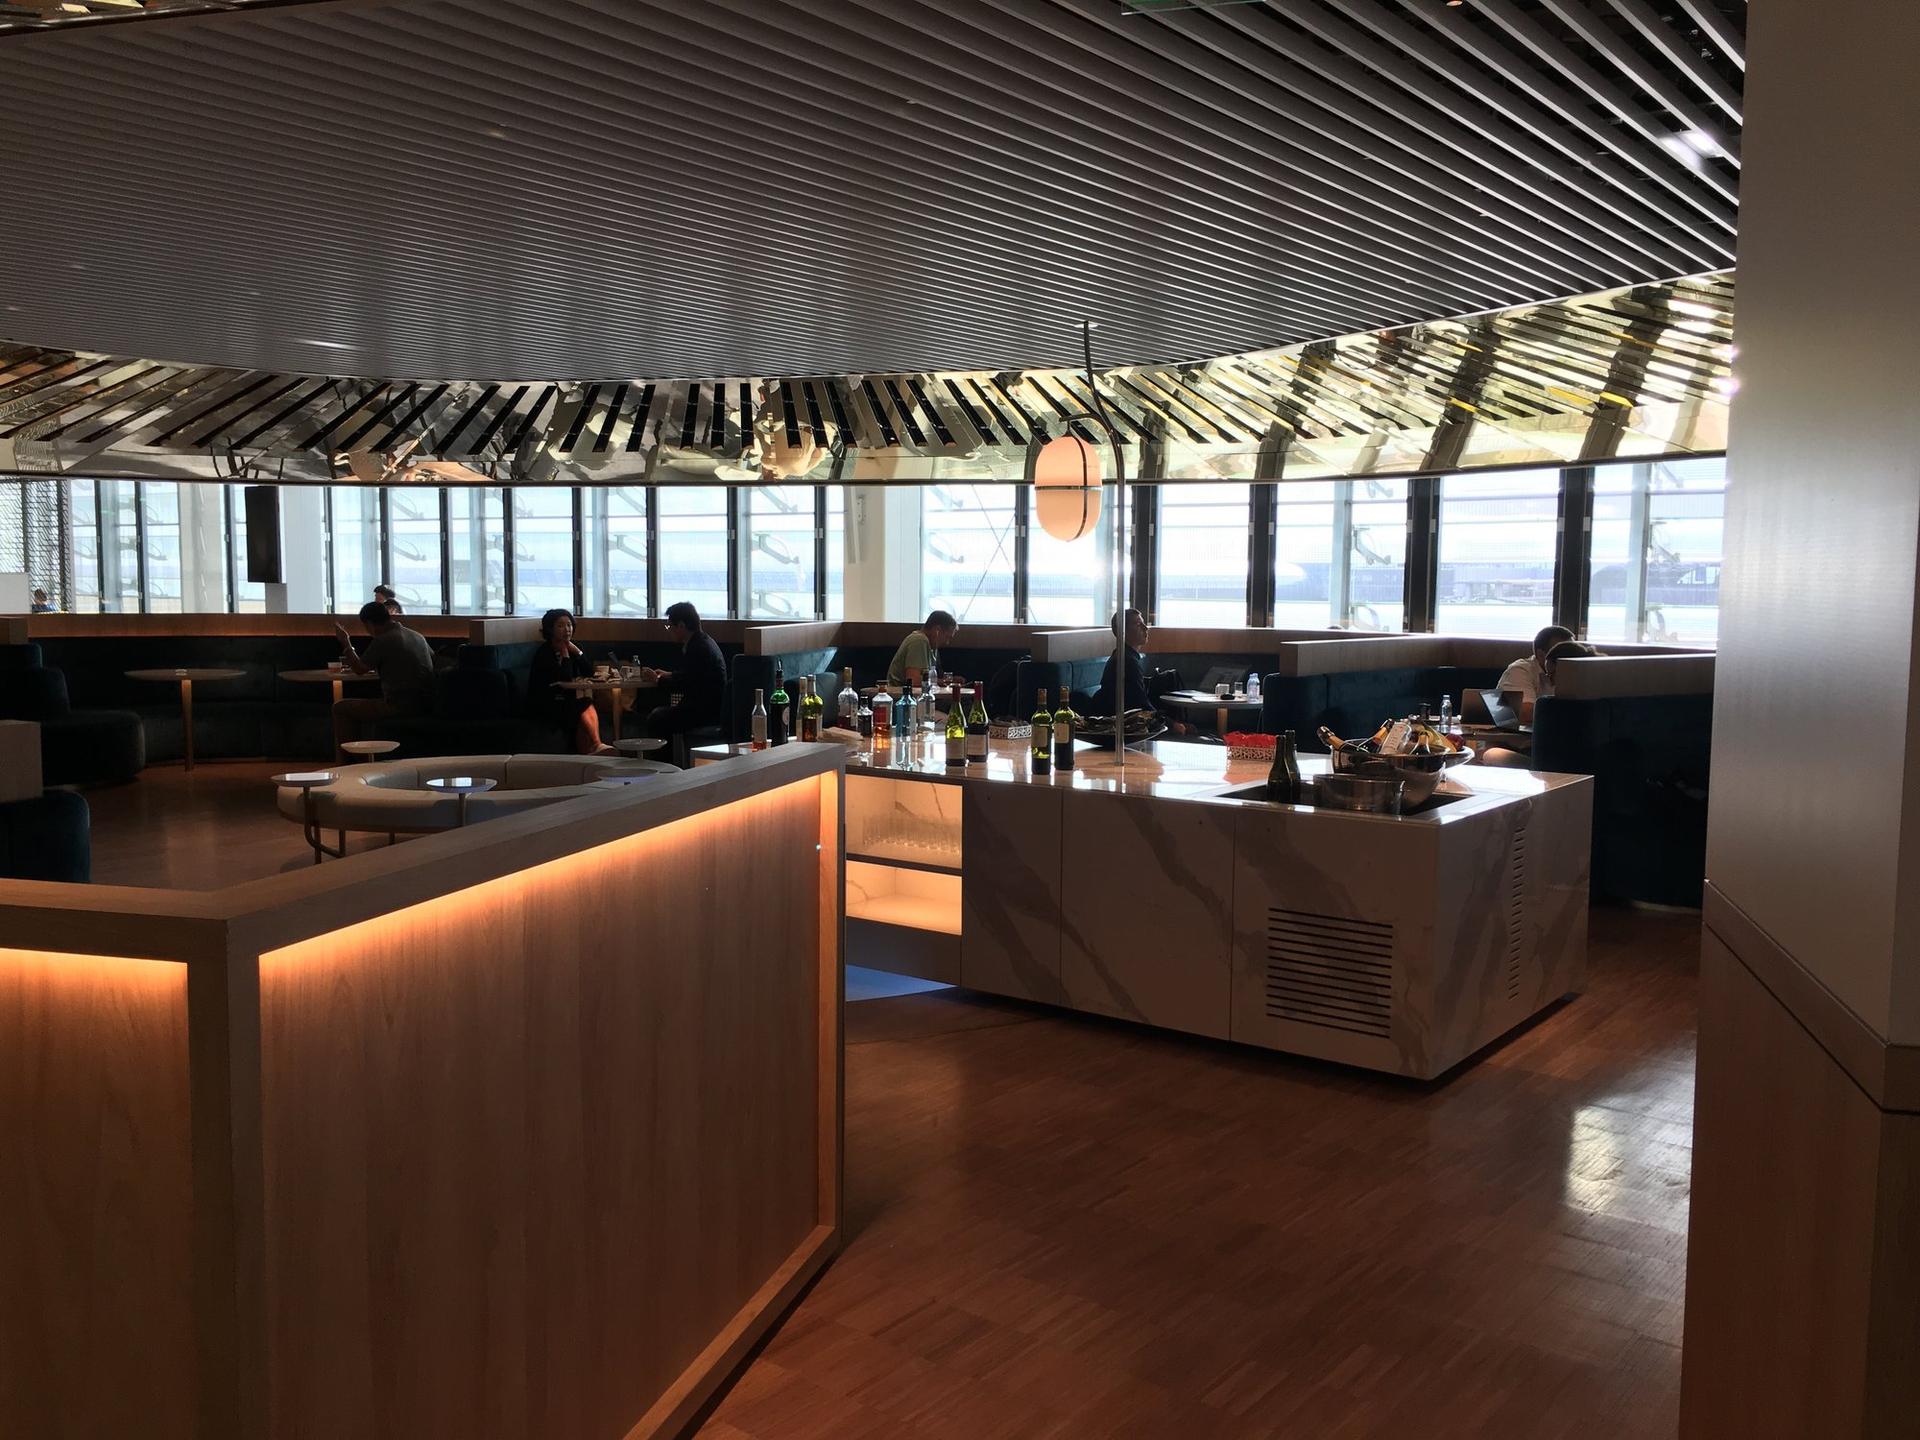 Air France Lounge (Concourse L) image 1 of 57